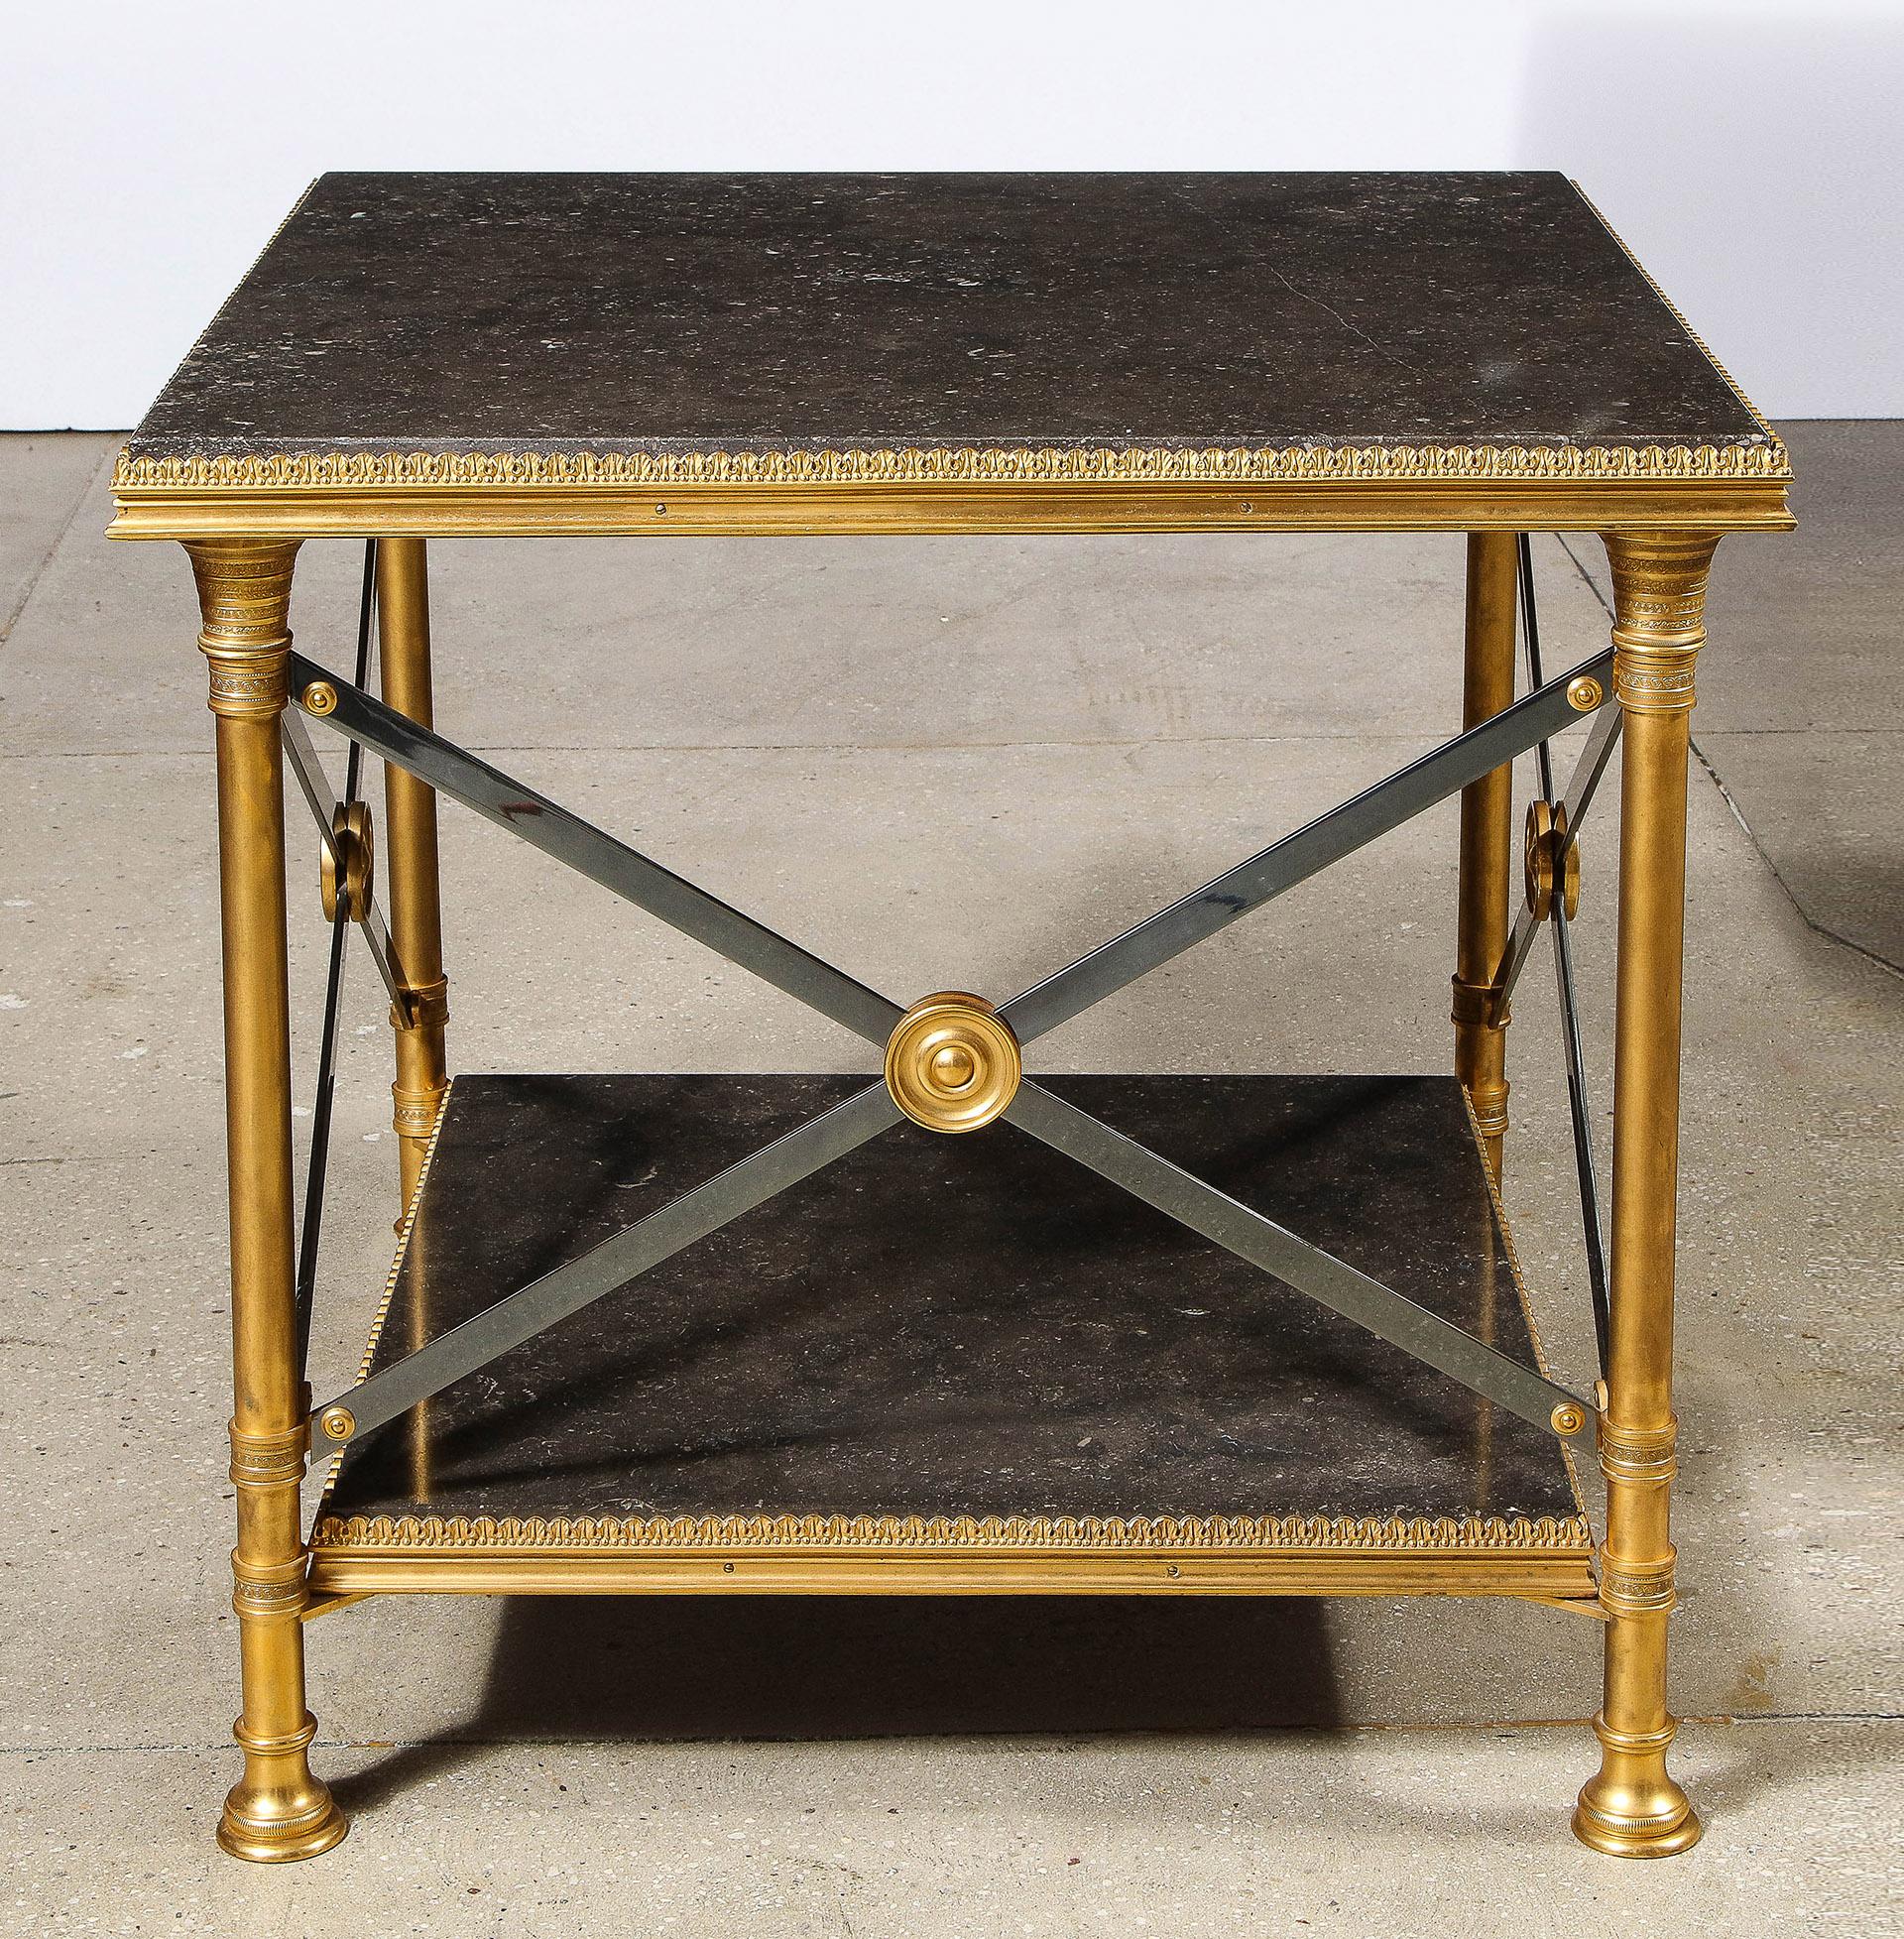 The two tier marble and bronze table with an intricately detailed cast bronze frame, 3 sides with steel and bronze cross slats. 
Having original Maison Jansen label.